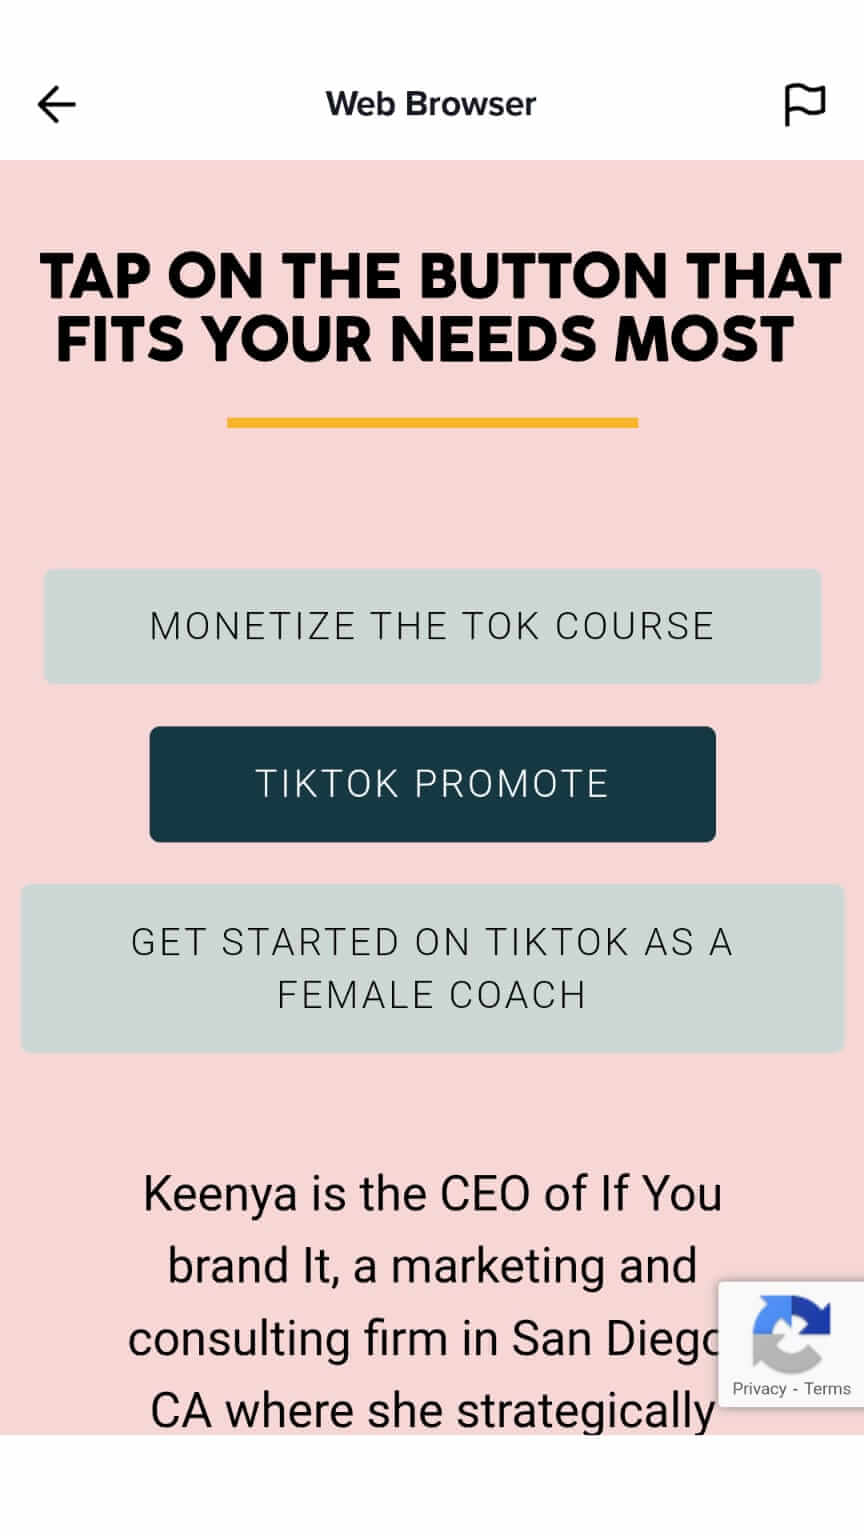 how-to-capture-leads-from-tiktok-sharing-links-bio-linktree-example-13